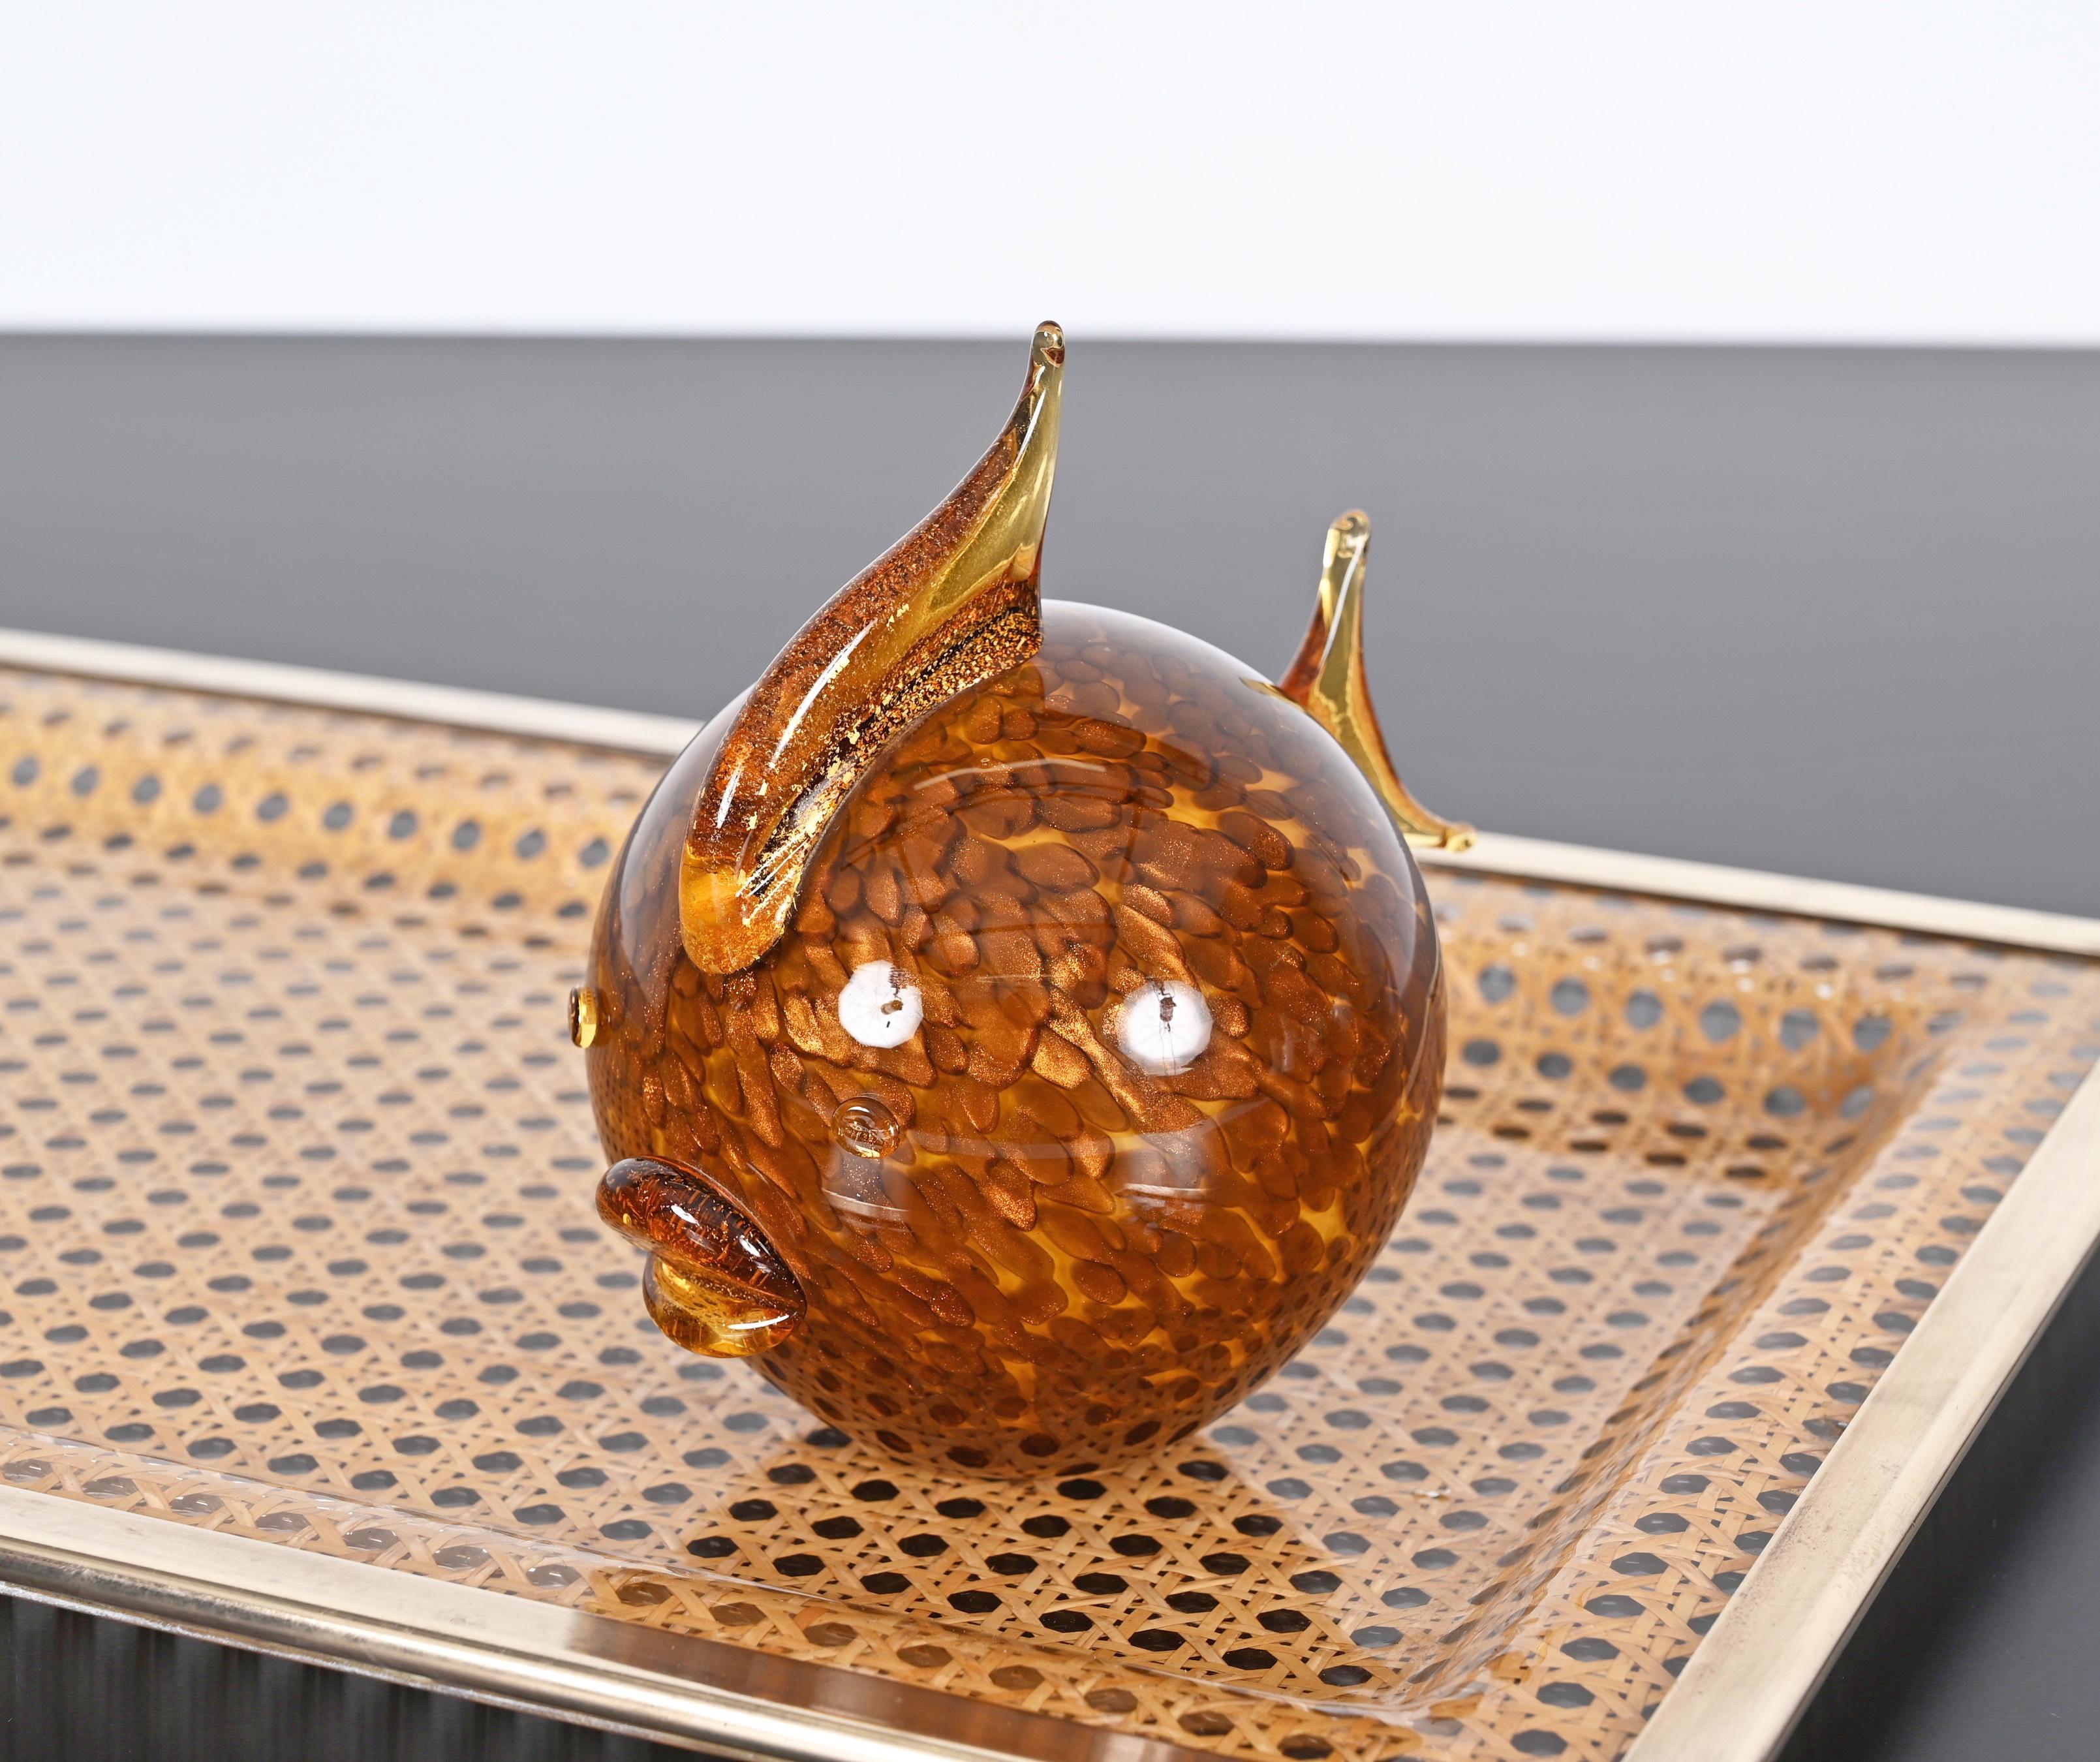 Gorgeous puffer fish sculpture in hand blown Murano Art Glass, manufactured in Italy in the 1980 by Cose Belle Cose rare, renowned for producing the highest quality and elegant glass
 
This unique sculpture features a fantastic hand blown glass of